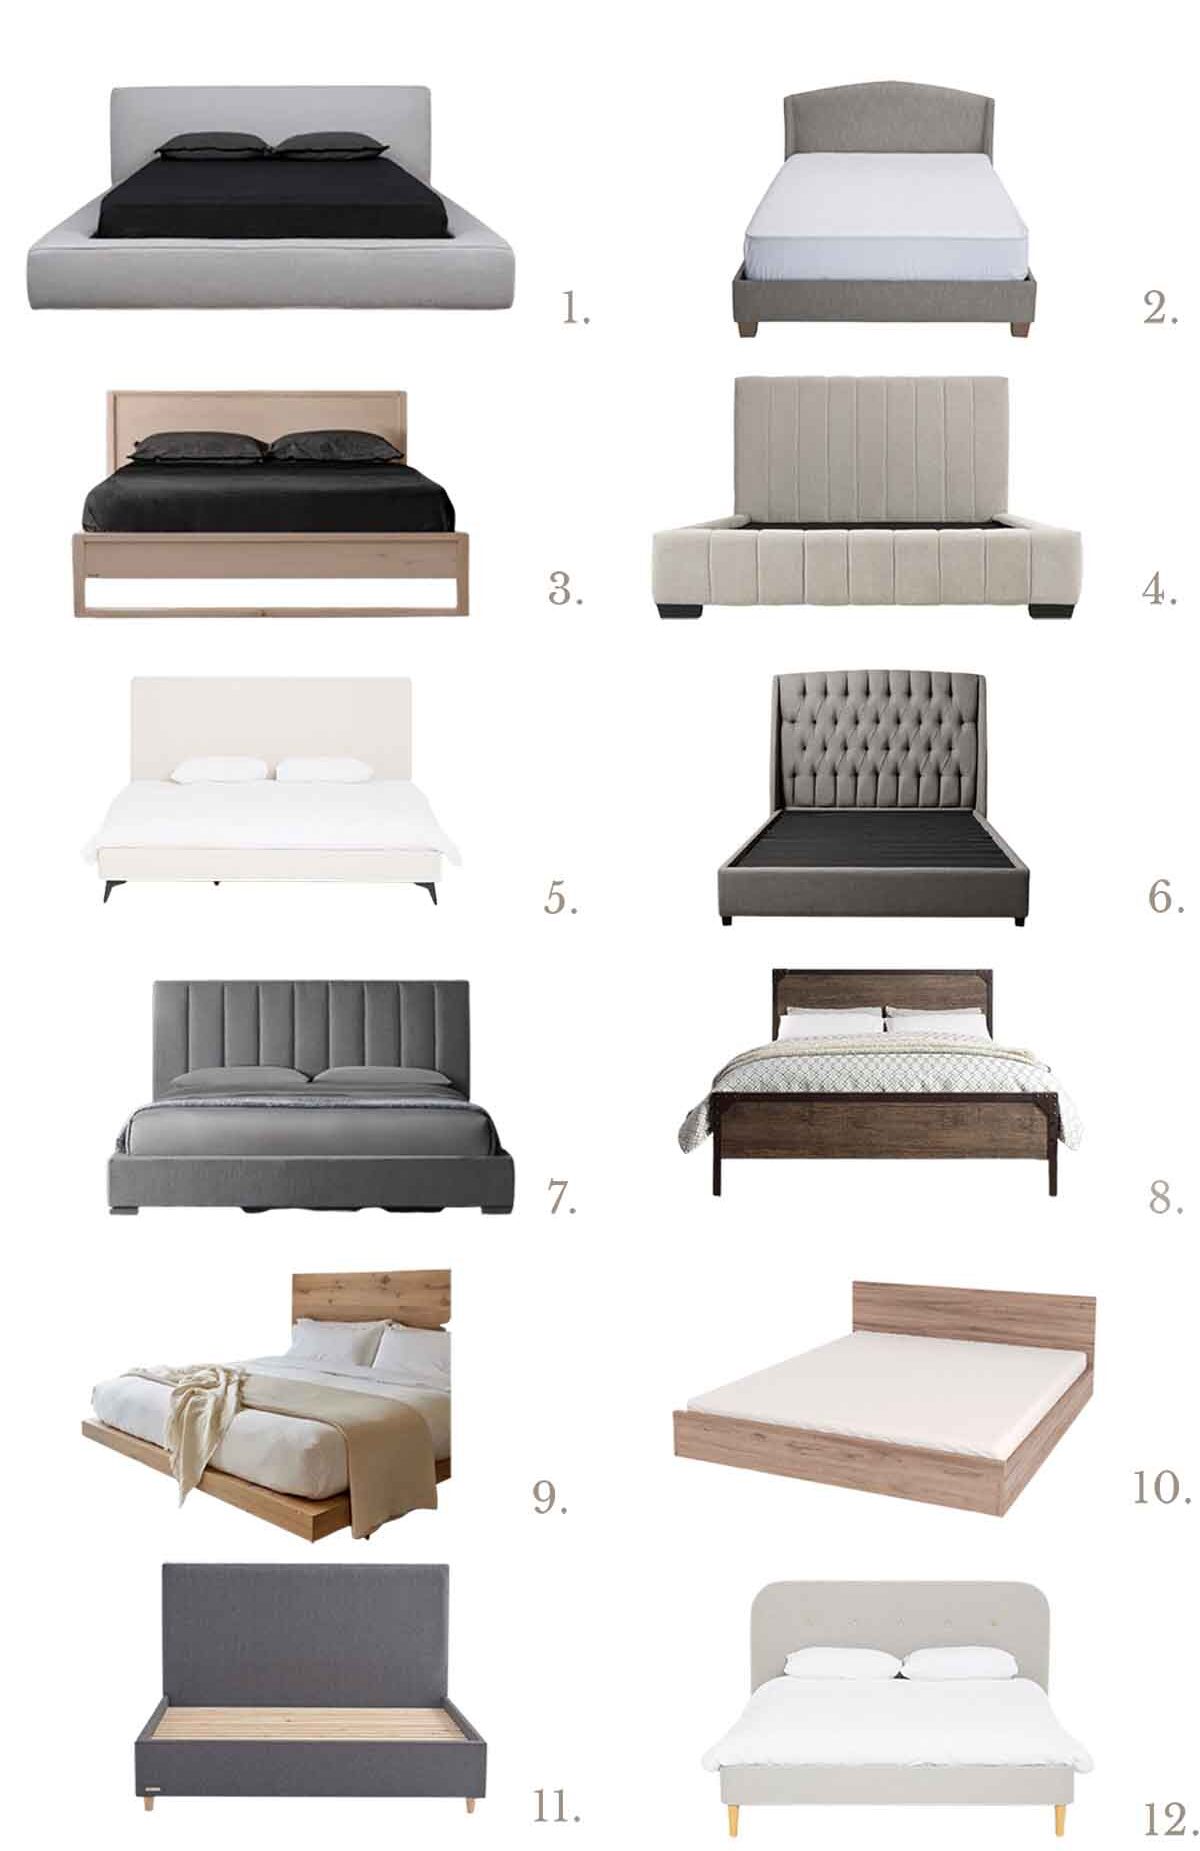 The Best Beds Recommended by The Home Studio